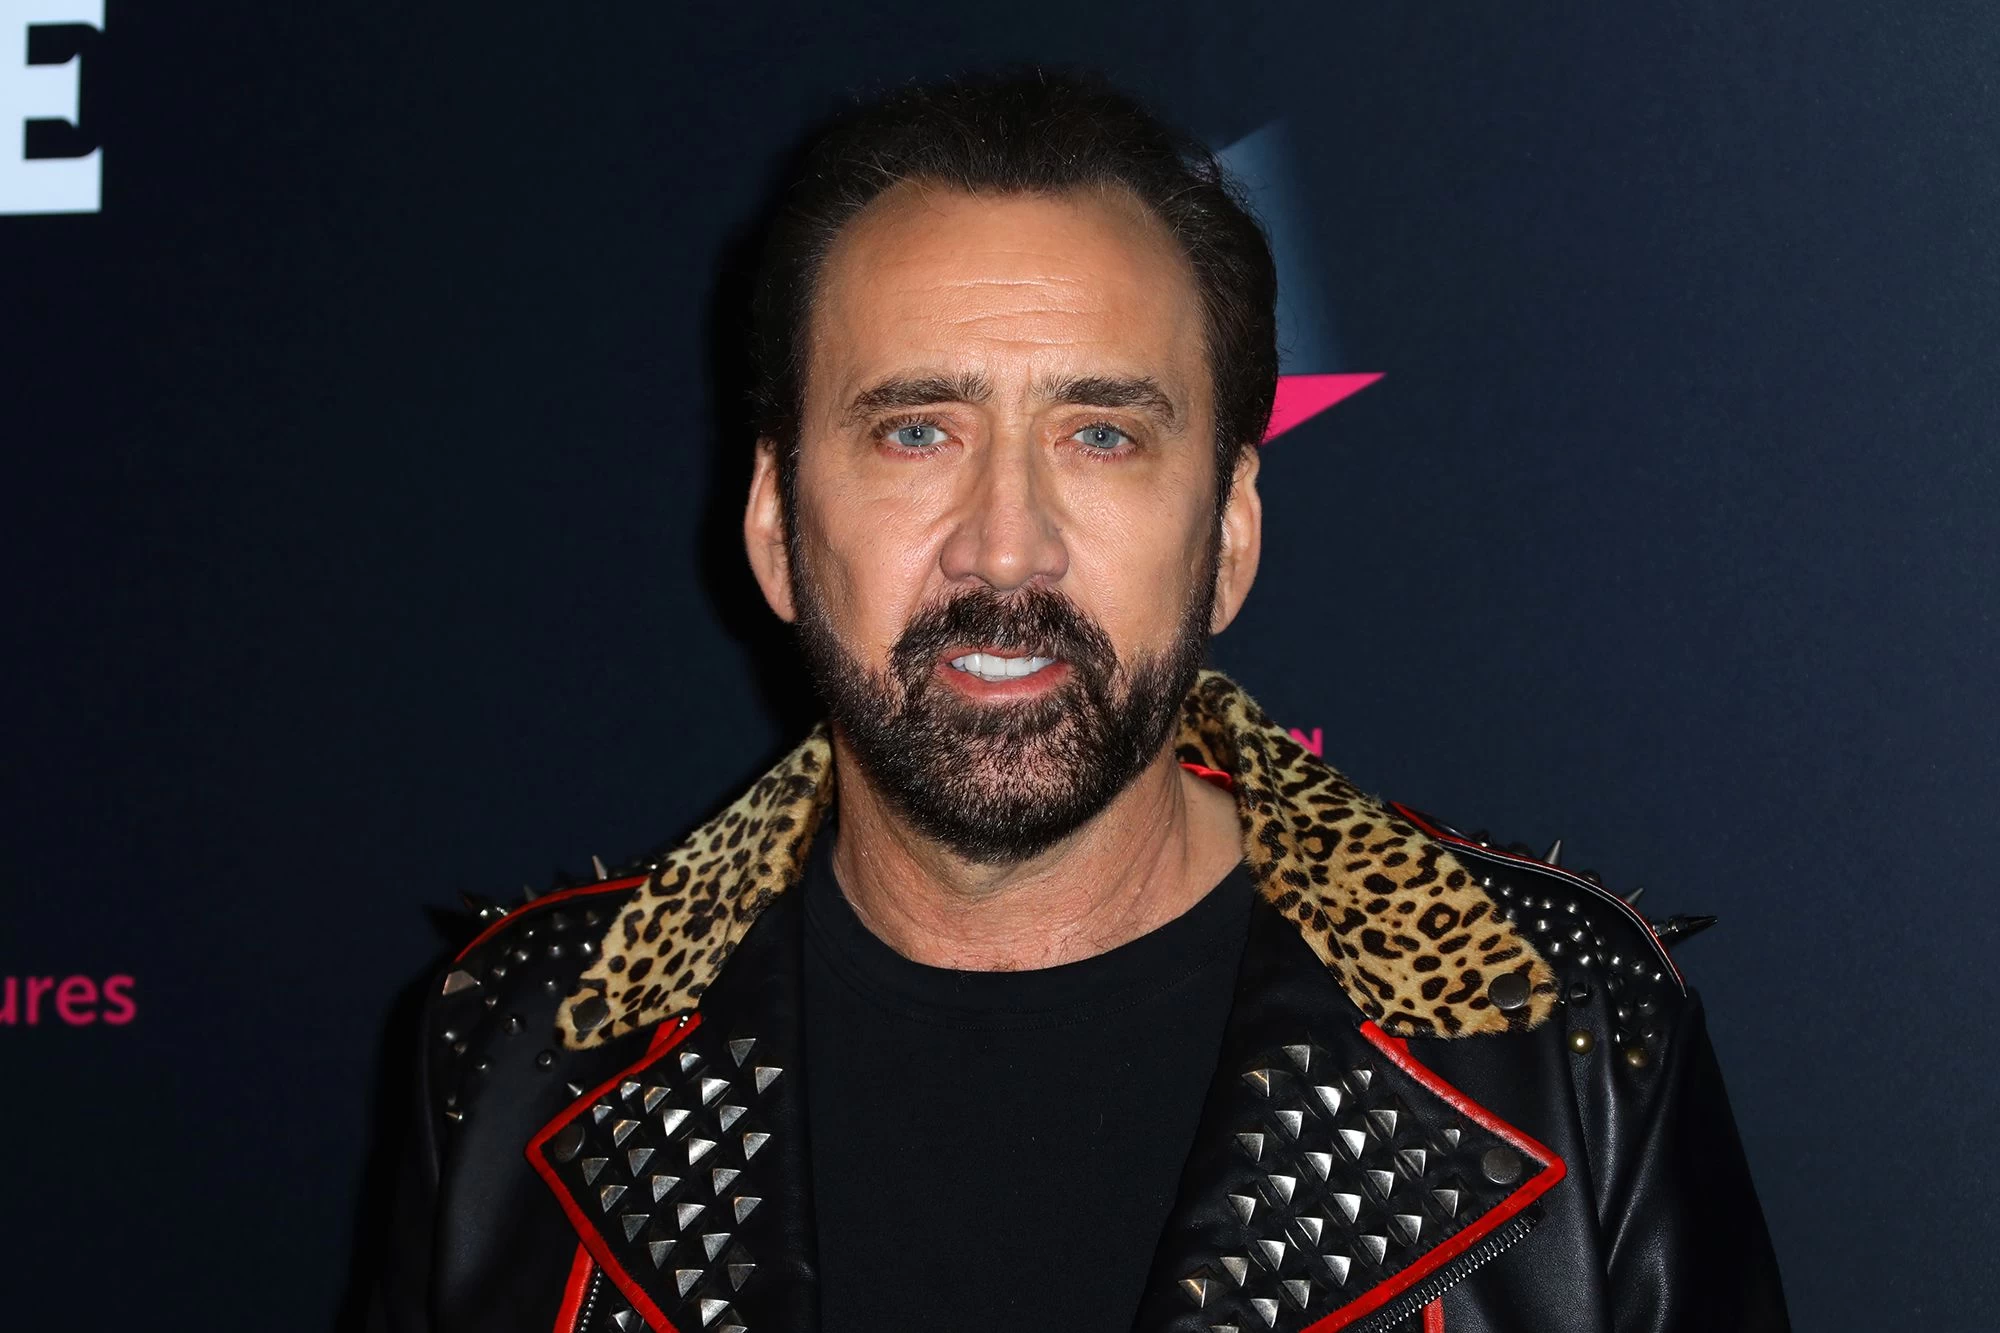 Fifth time's the charm; Nicolas Cage weds again